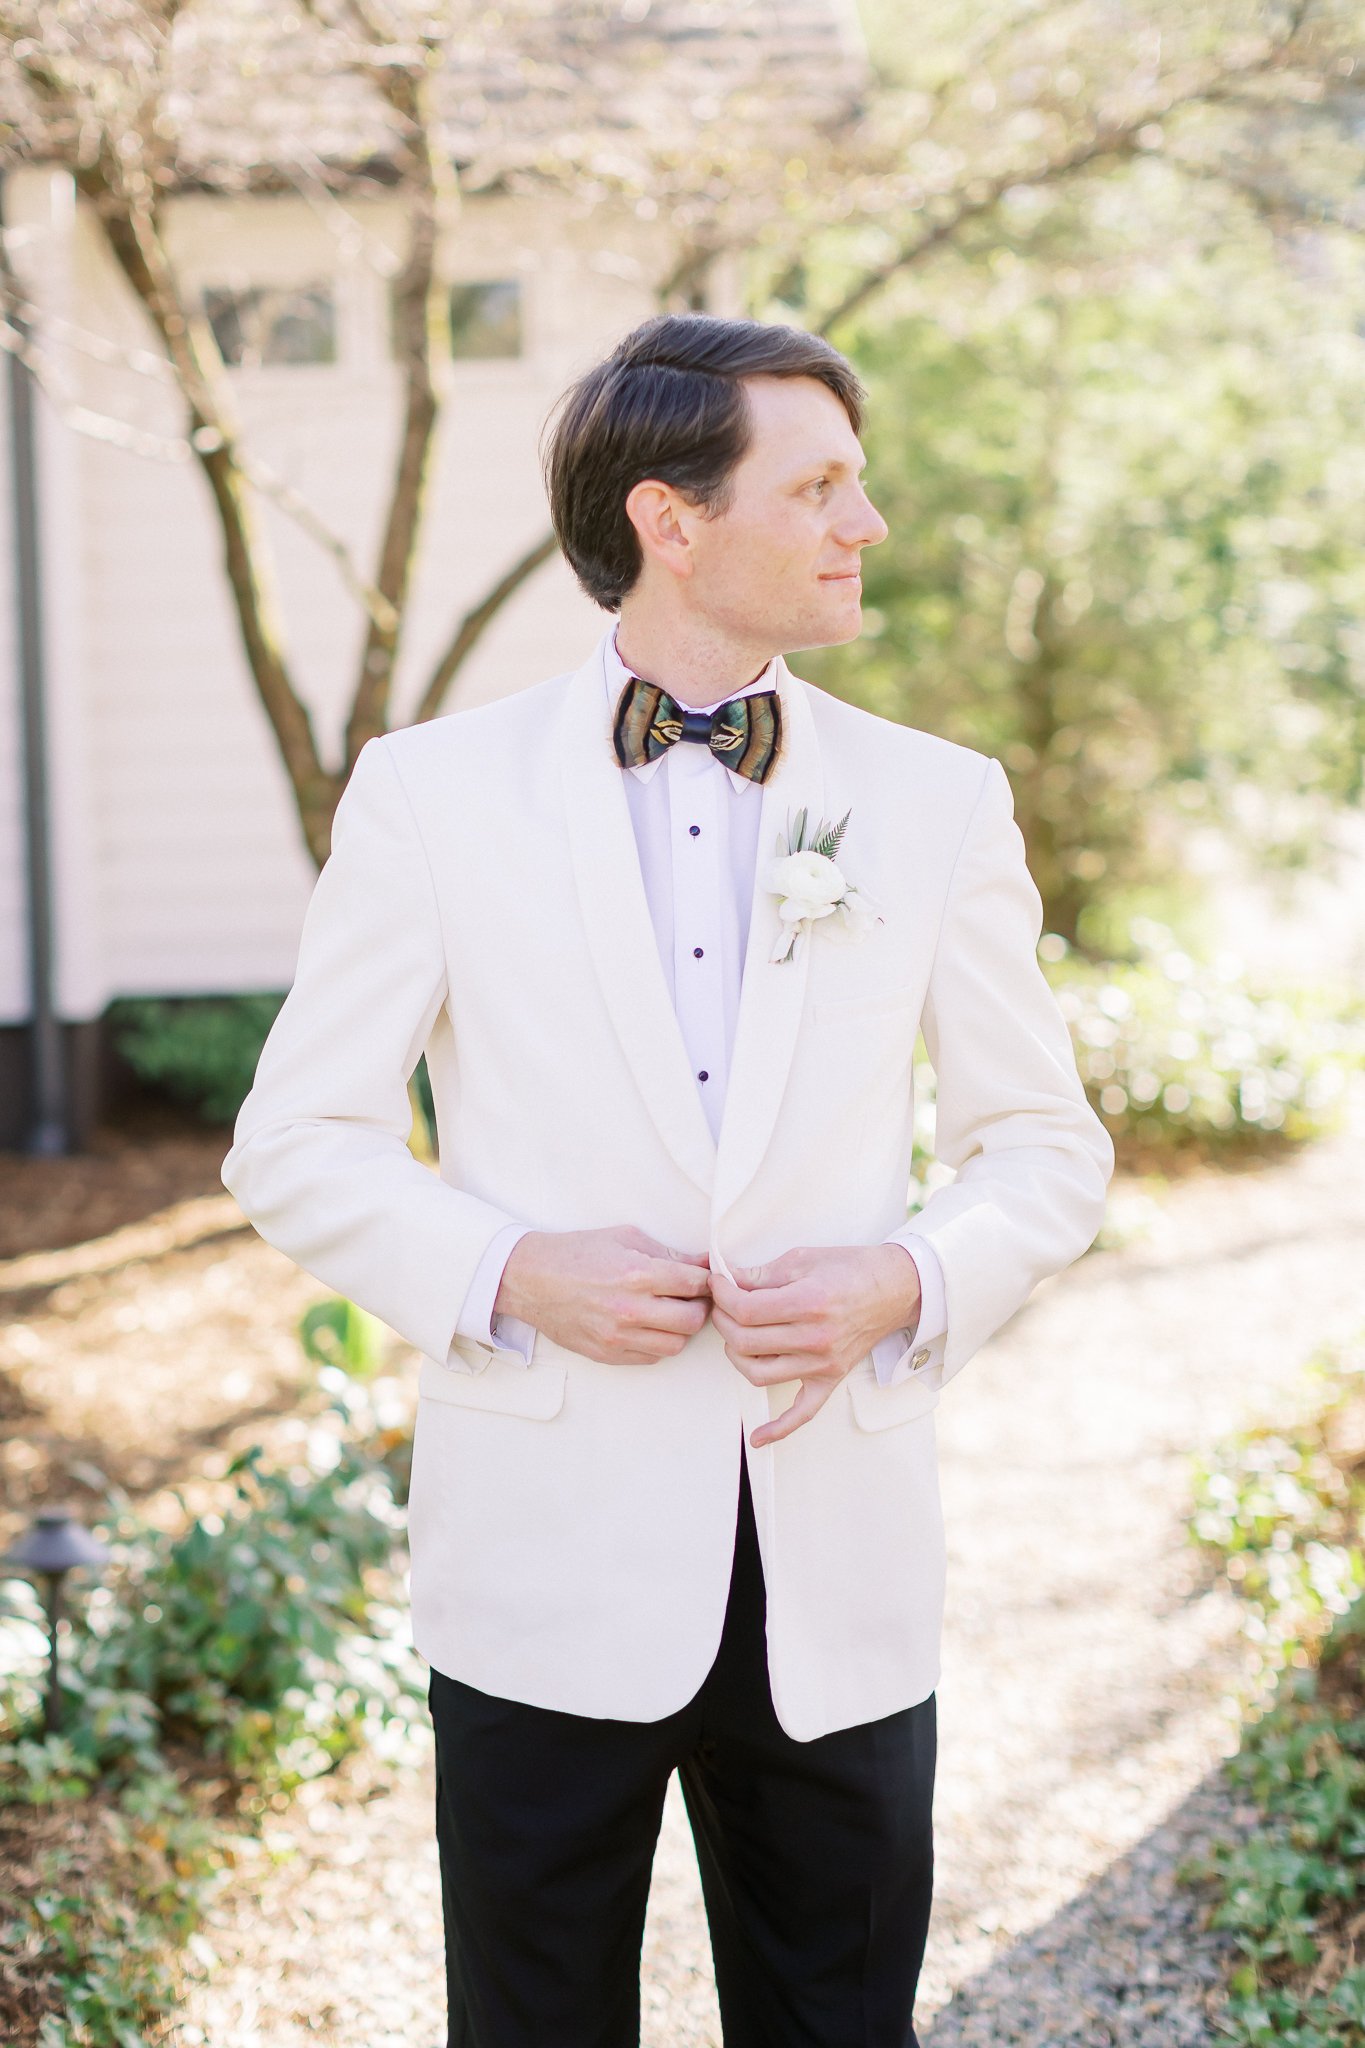 Groom Portrait with White tux